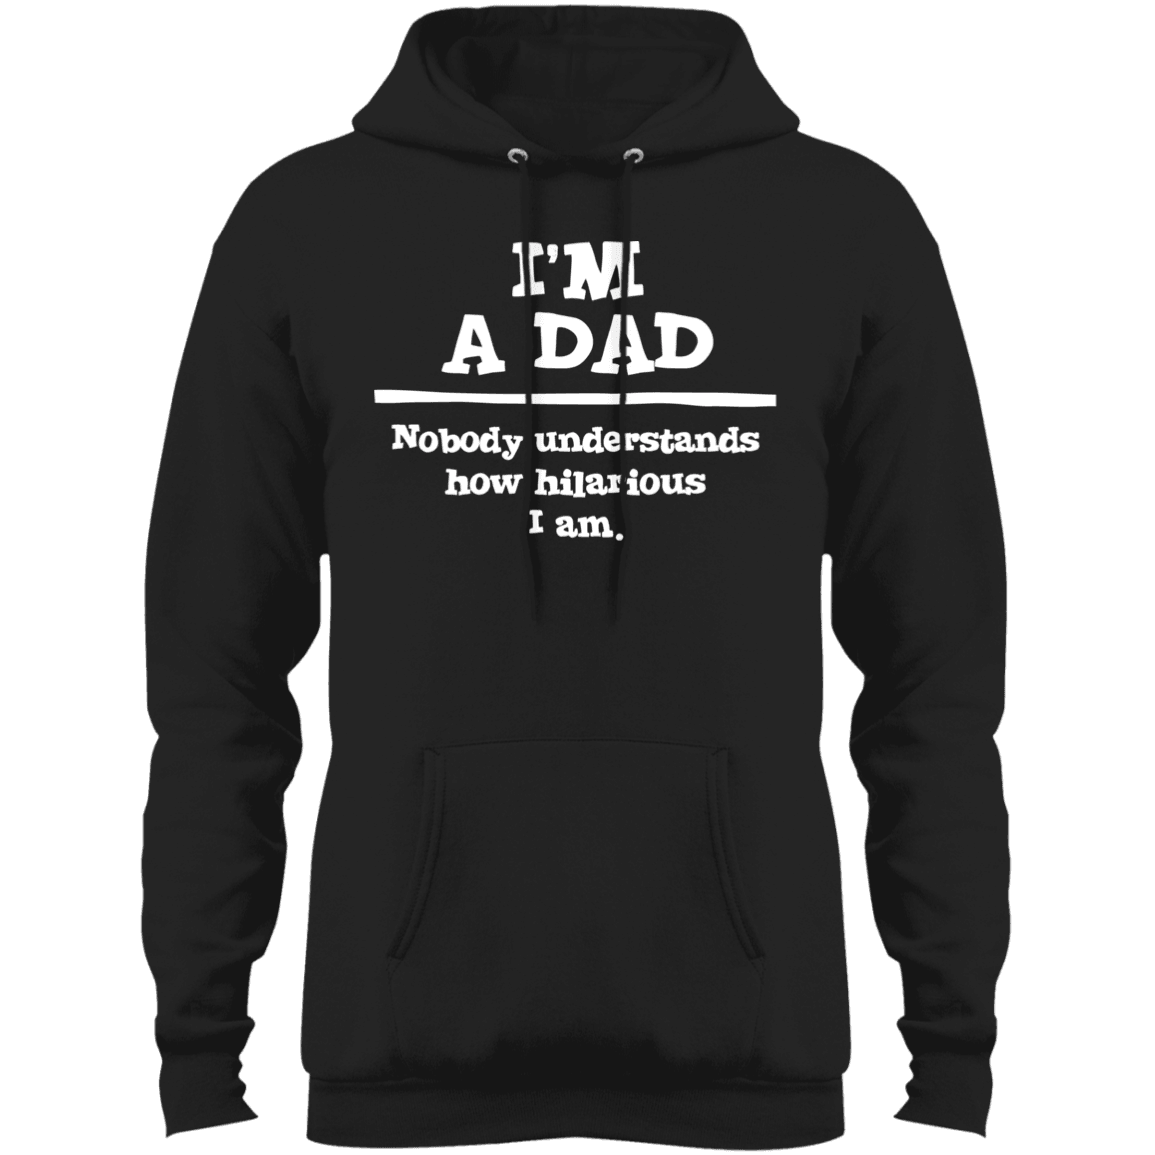 Designs by MyUtopia Shout Out:'I'm A Dad. Nobody understands how hilarious I am Core Fleece Pullover Hoodie,Jet Black / S,Sweatshirts